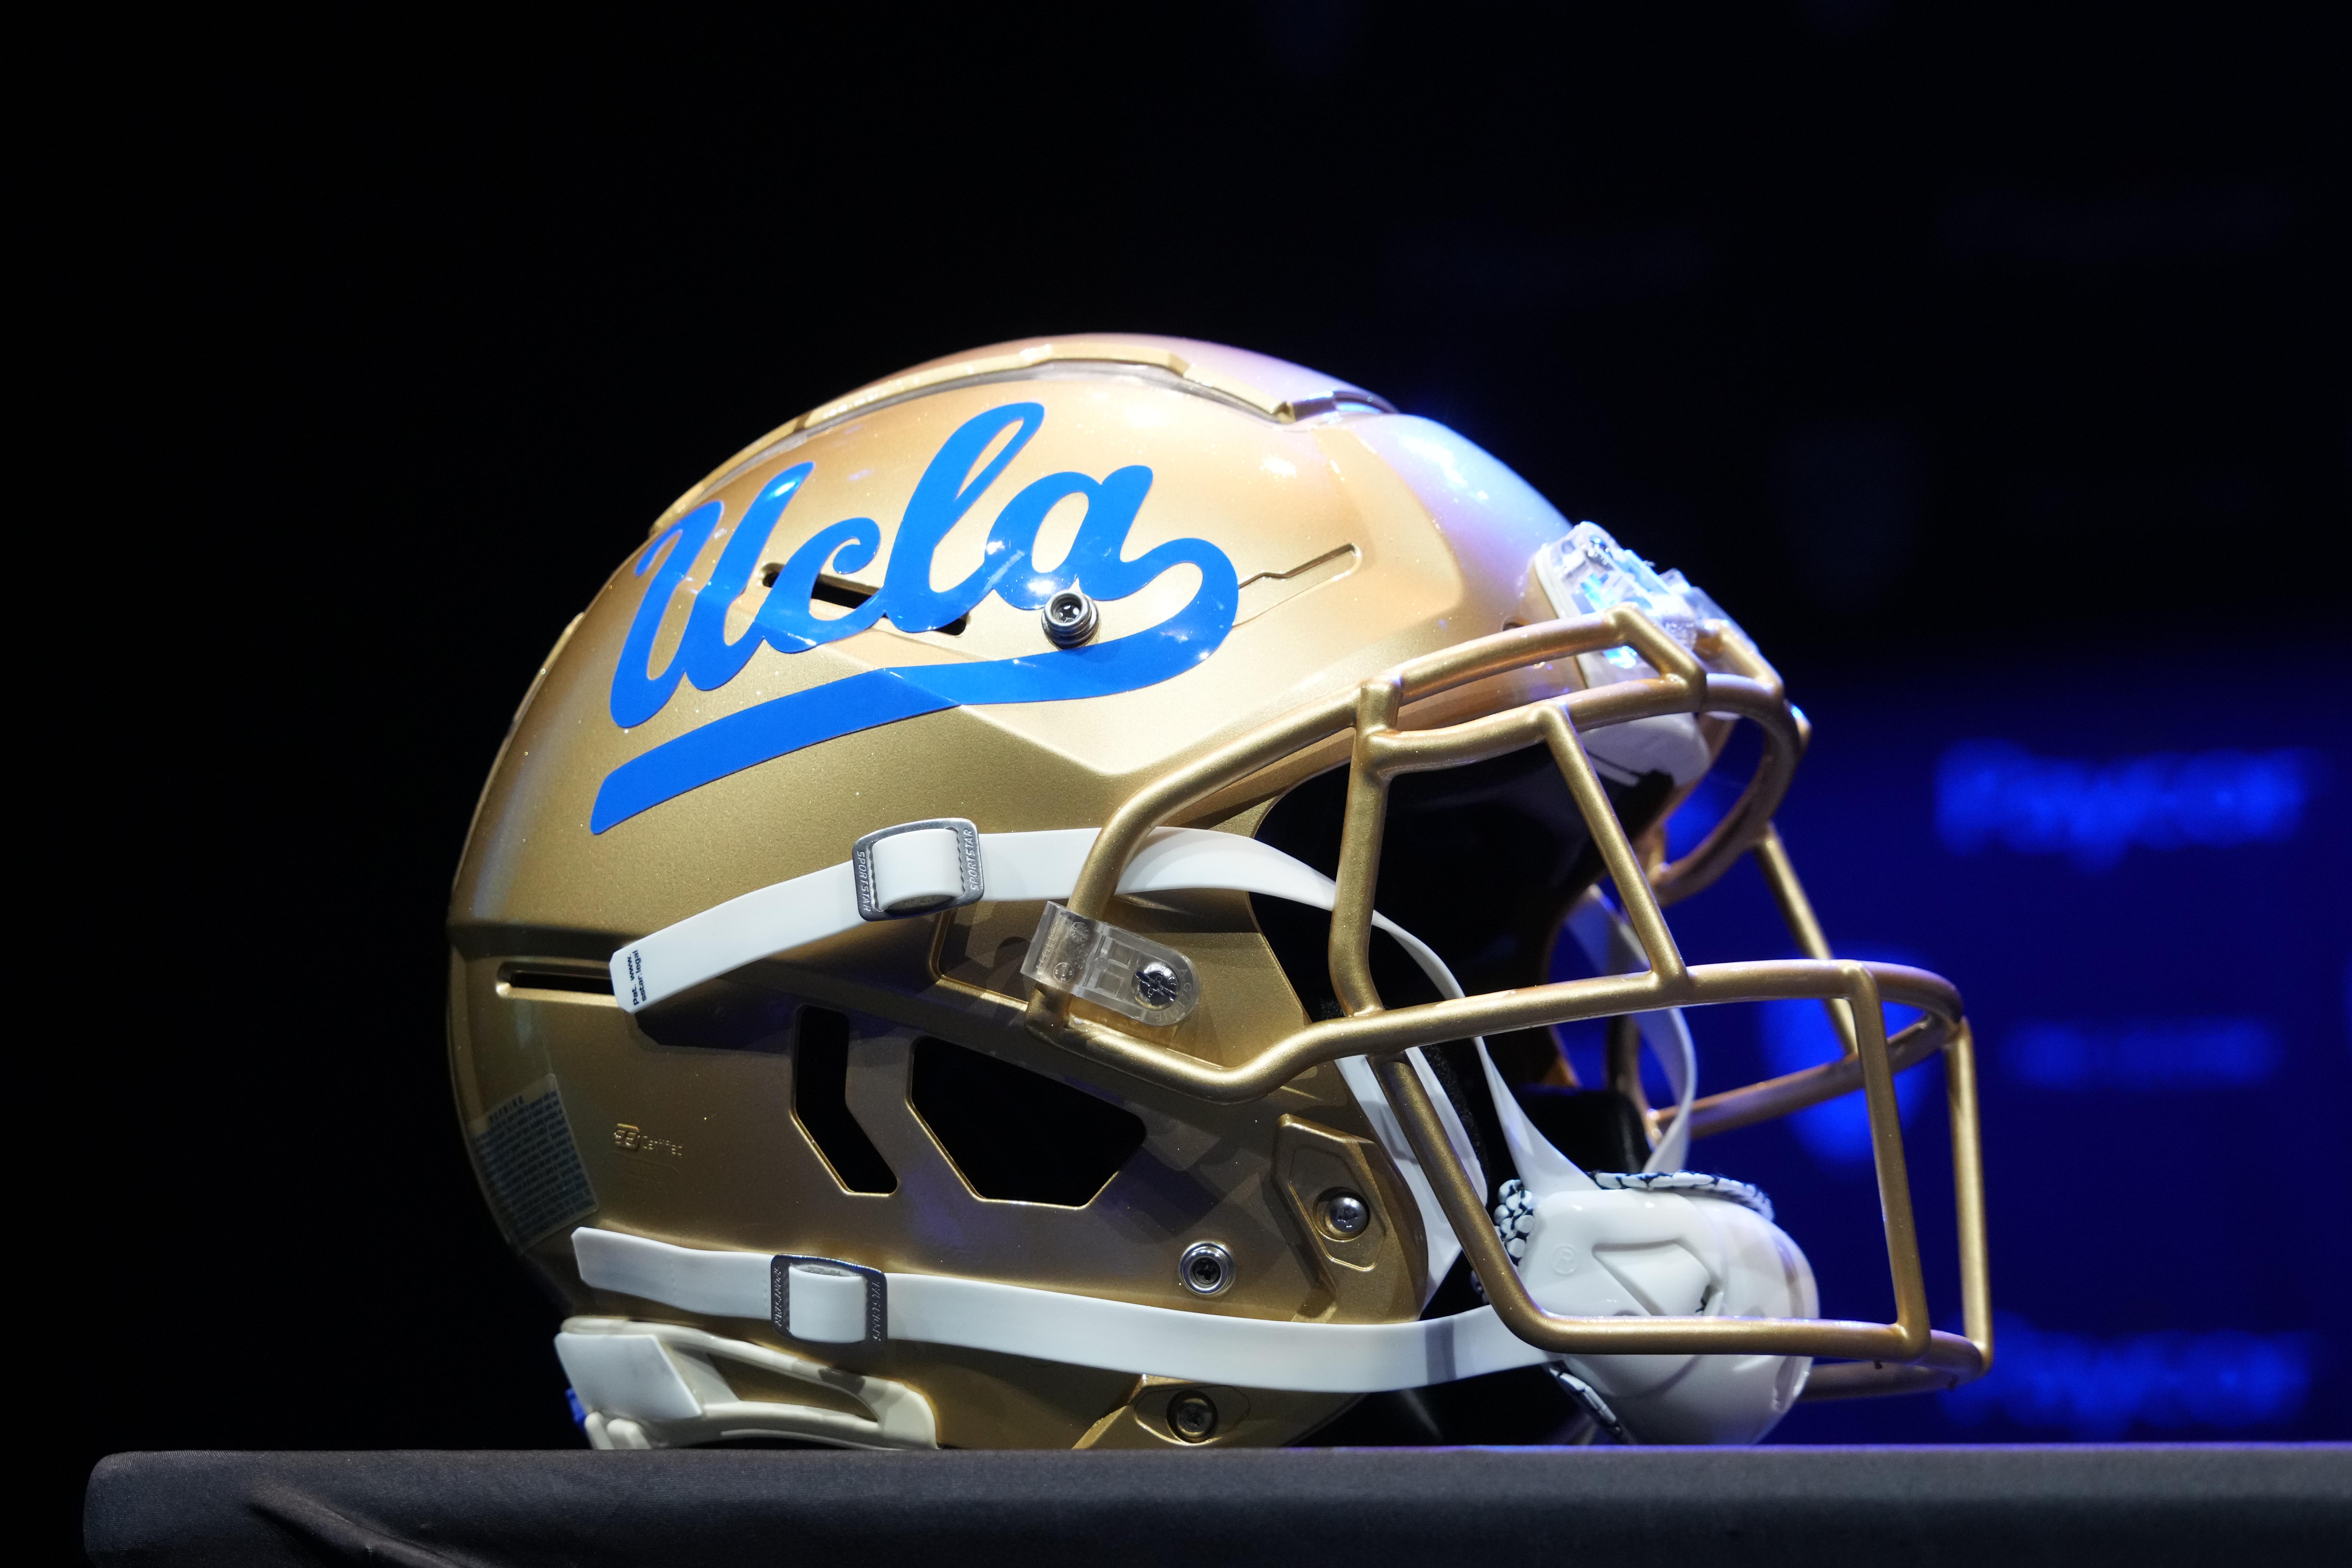 6 UCLA Bruins defensive coordinator candidates to replace D’Anton Lynn